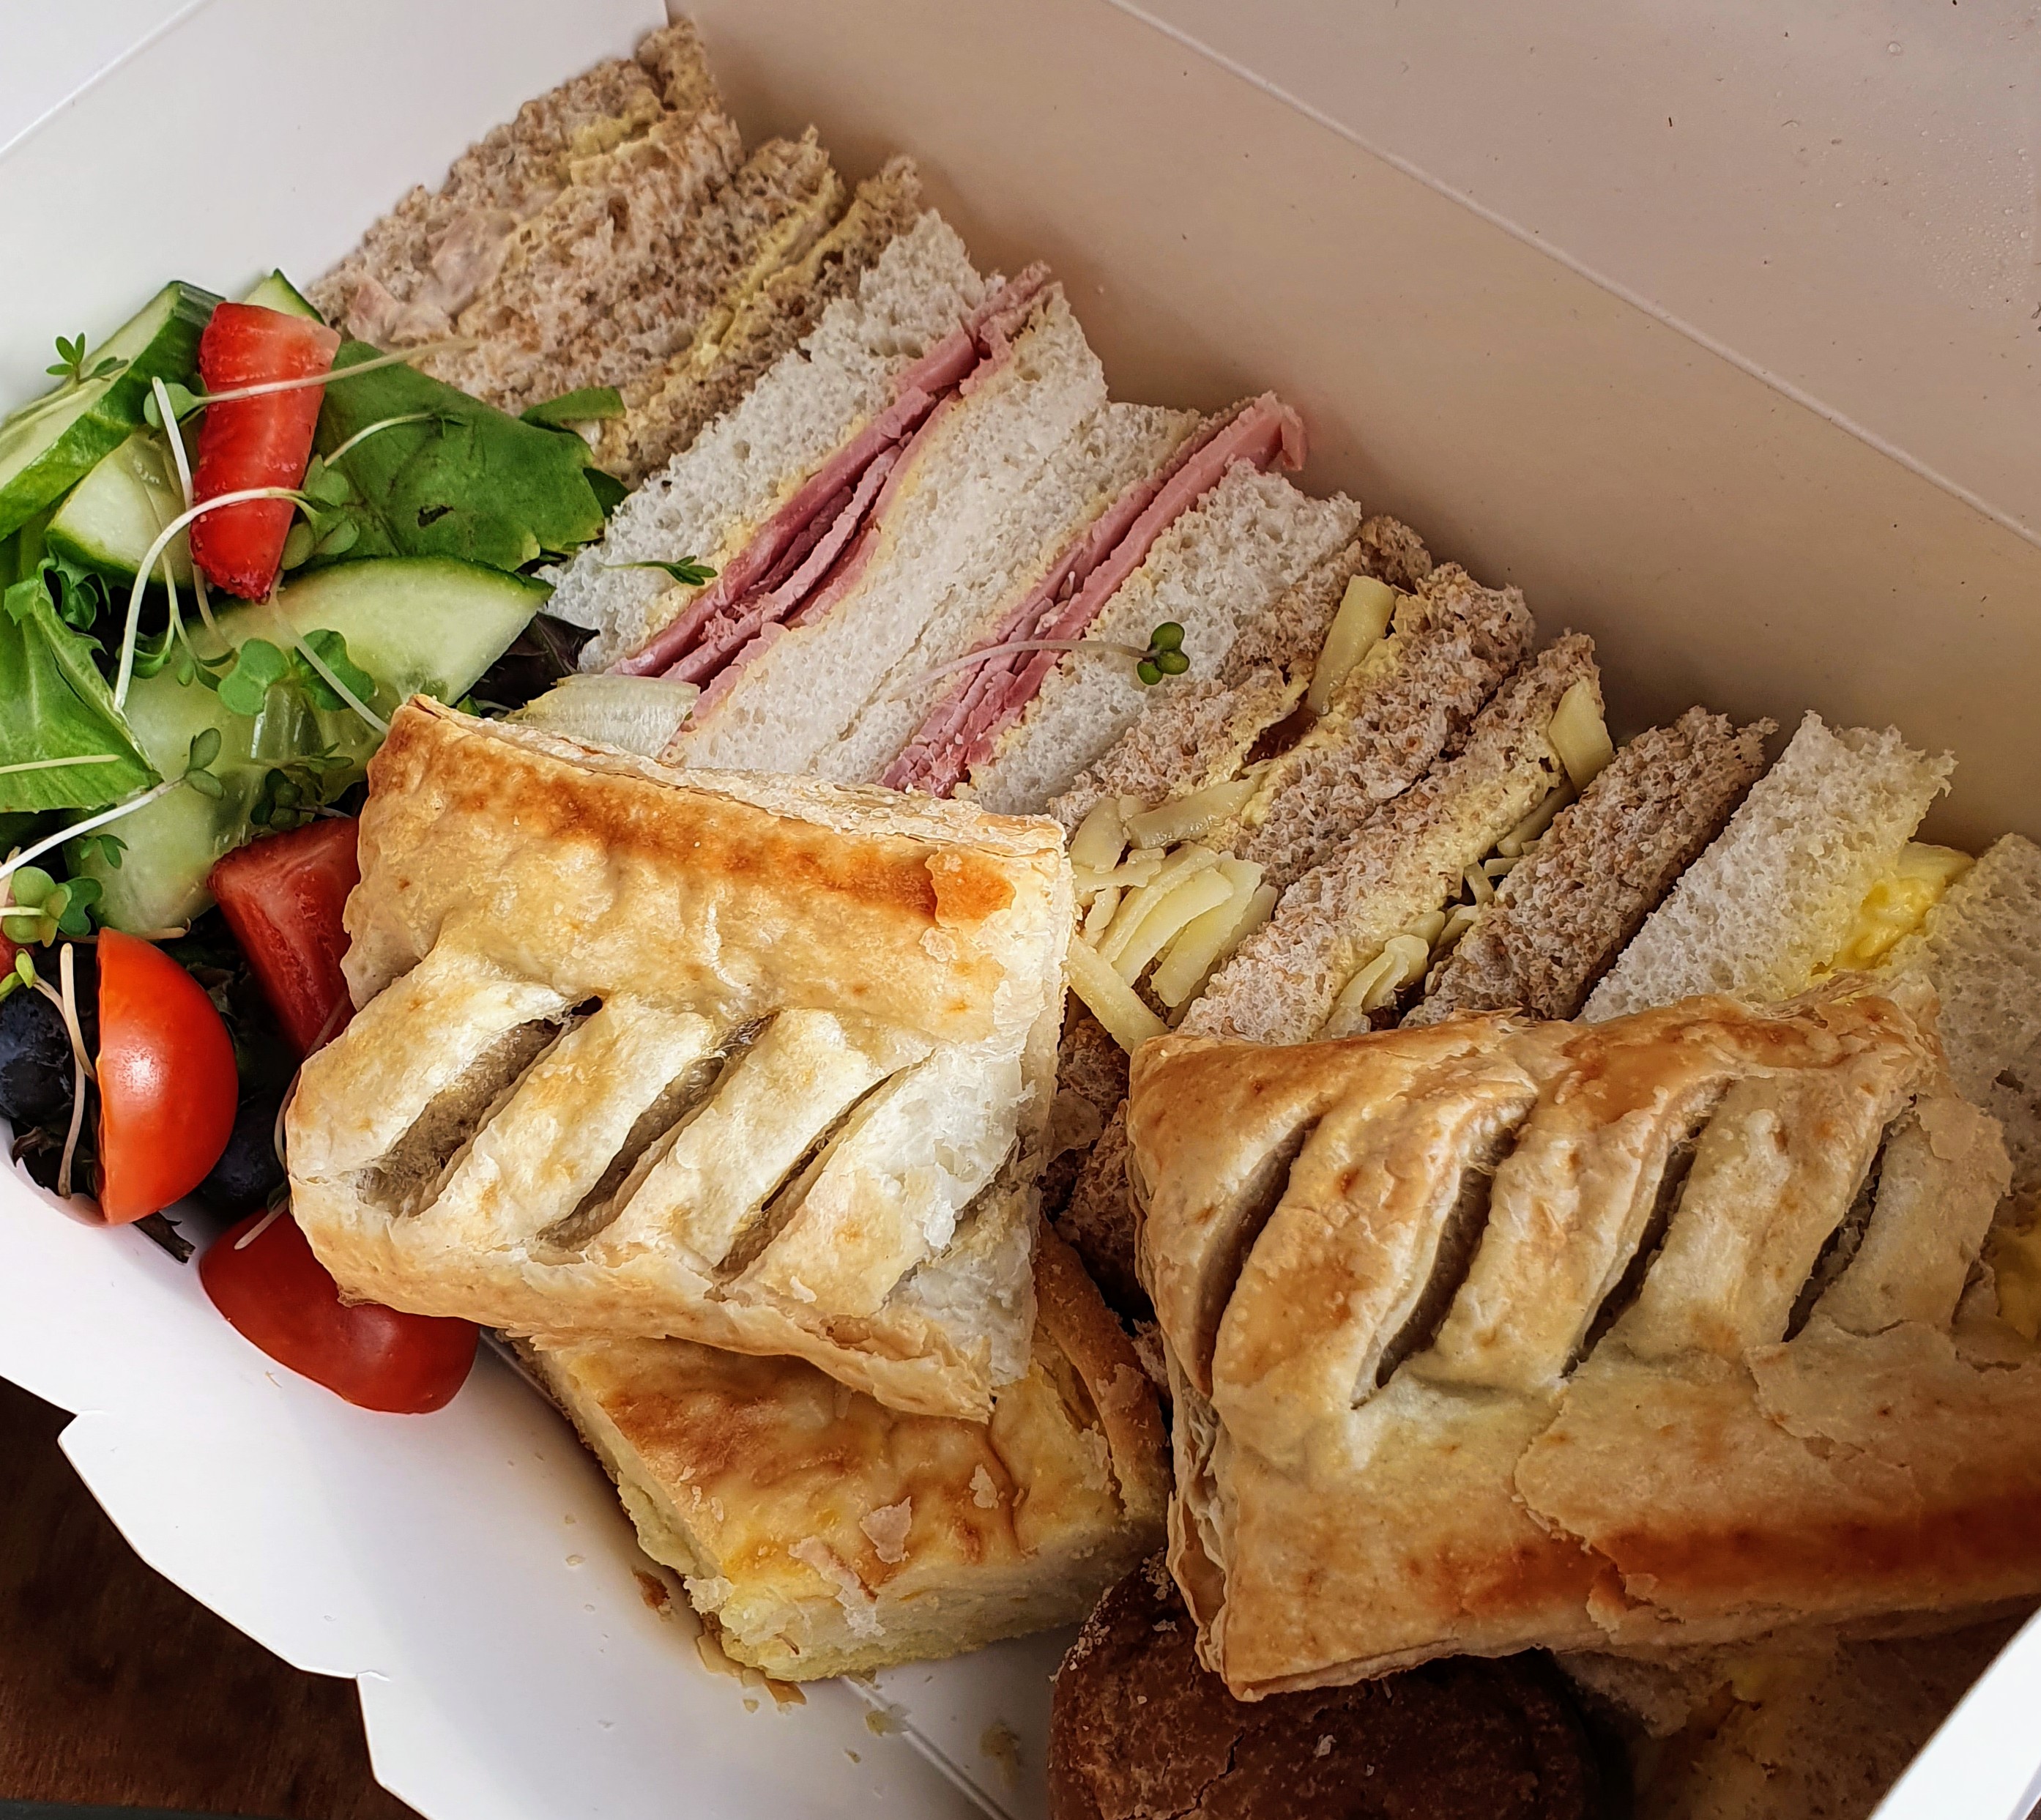 Sandwiches, pork pie, salad and sausage rolls, Dolly Birds Mobile Catering, Staffordshire